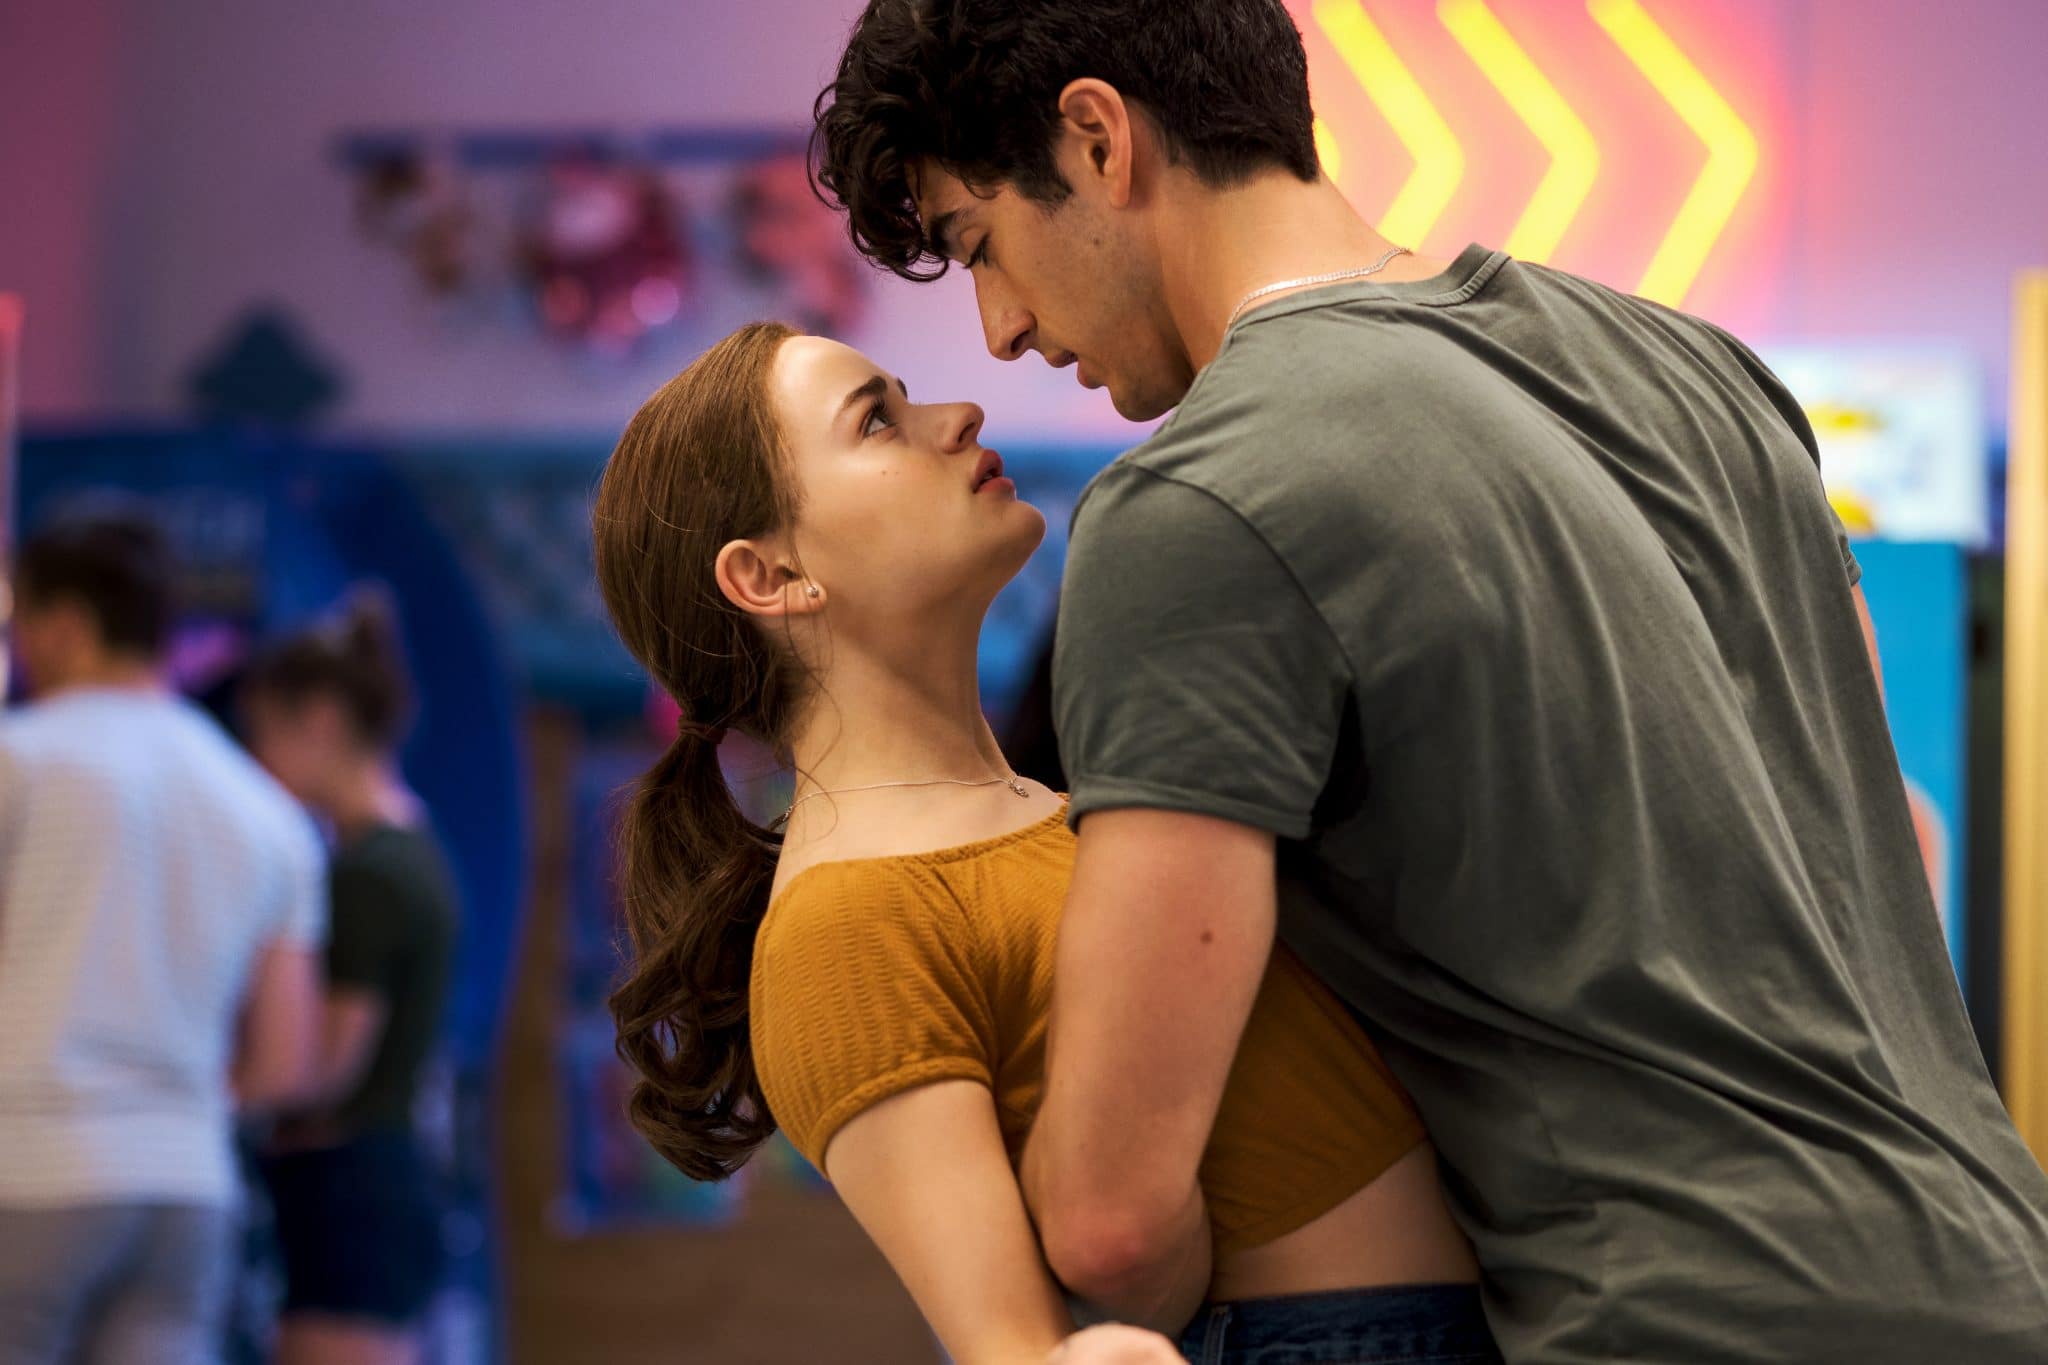 The Kissing Booth 2 Sind Joey King und Taylor Zakhar Perez ein Paar scaled 1